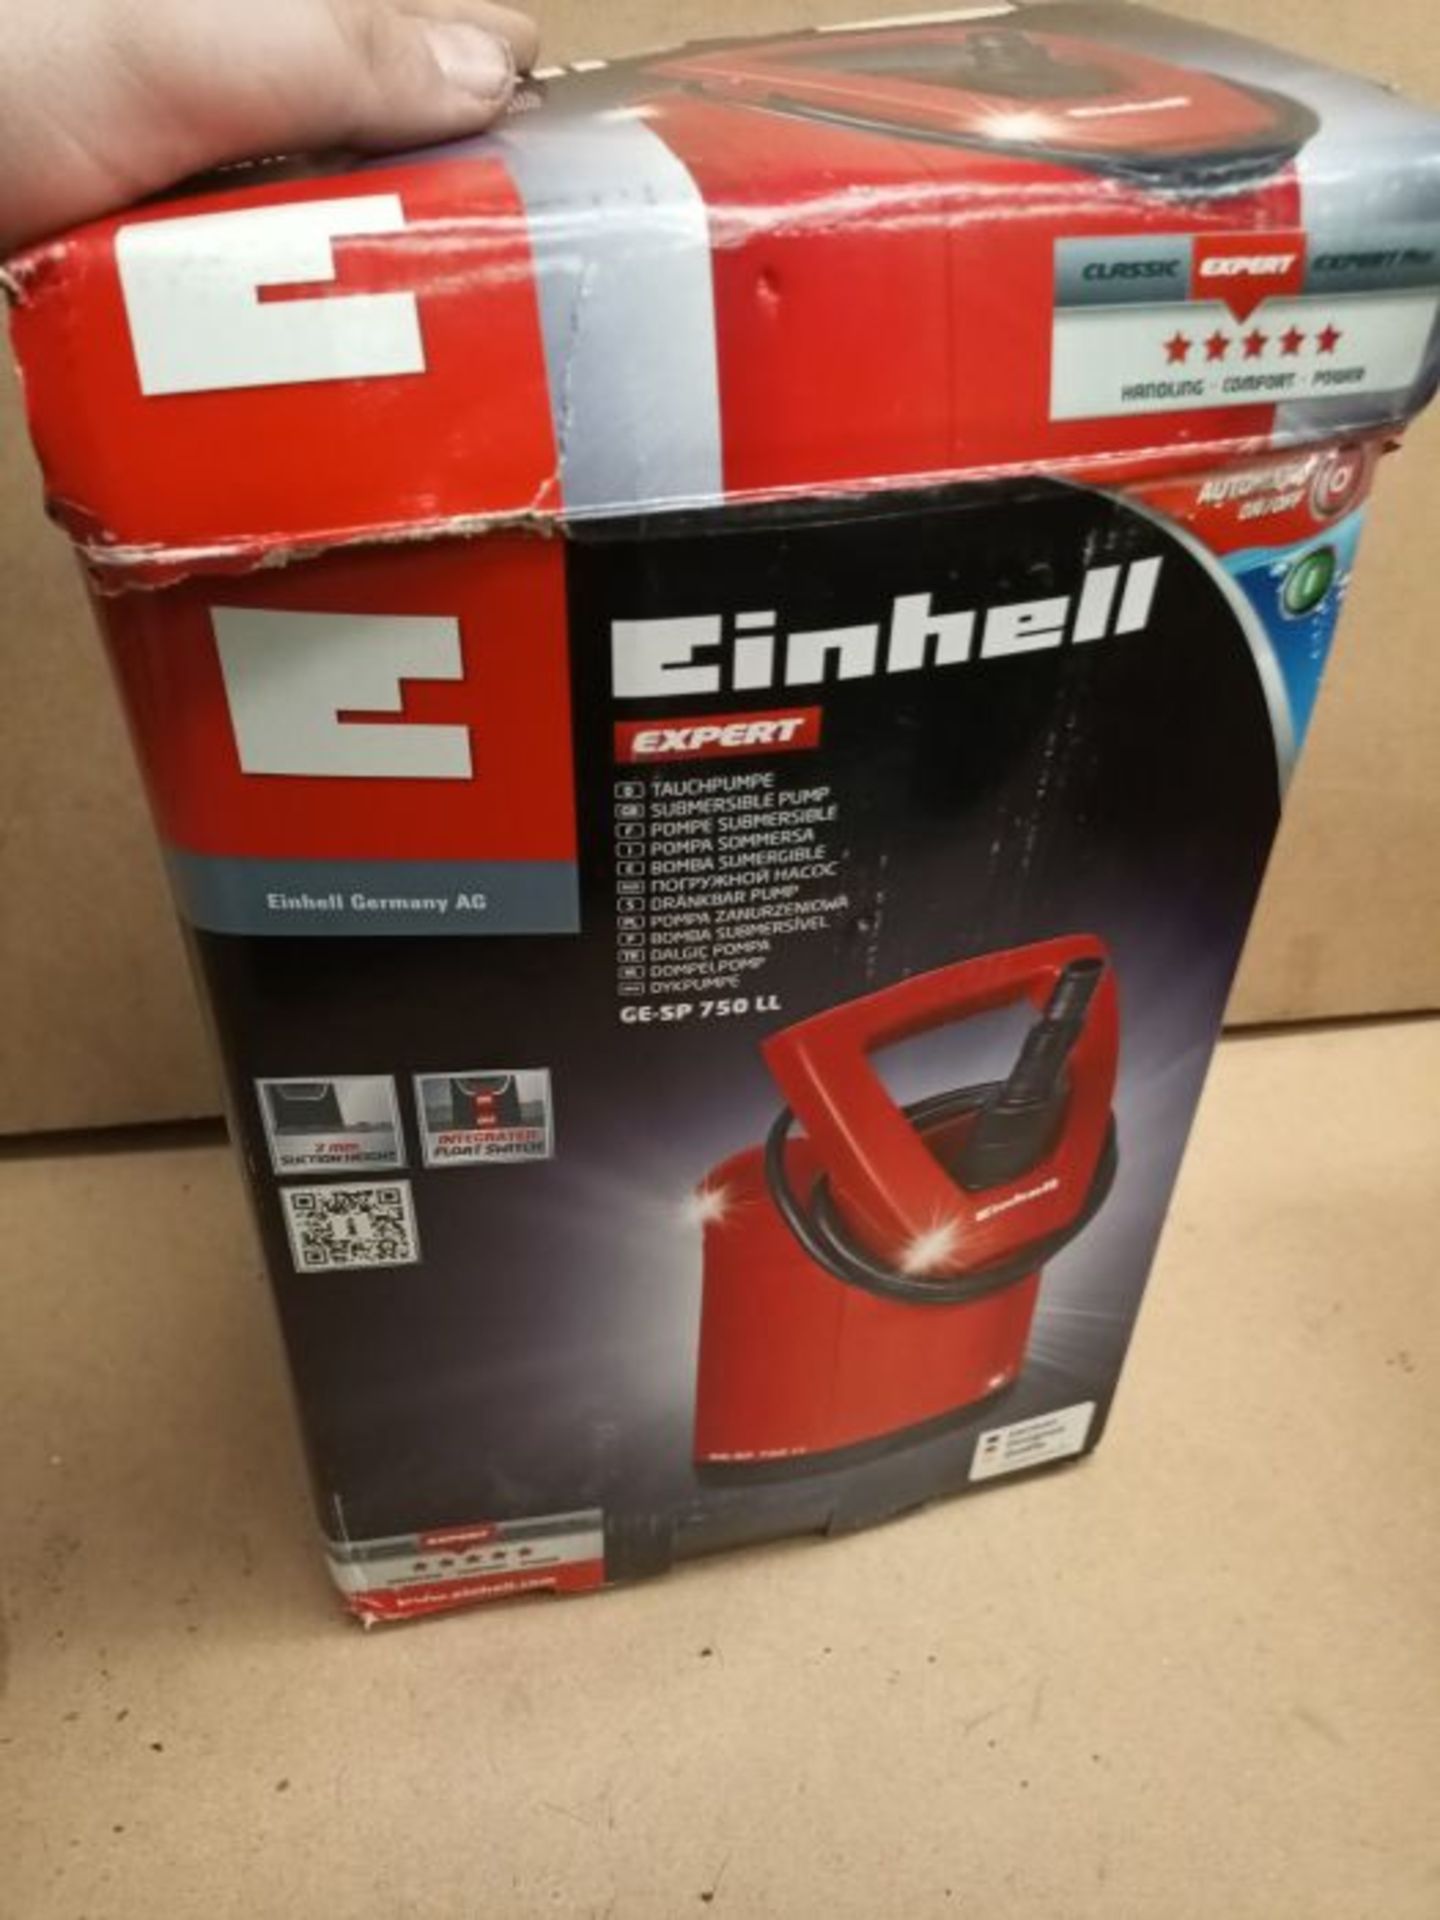 RRP £69.00 Einhell Submersible Pump GE-SP 750 LL (750 W, Maximum 15000 l/h, Maximum Discharge Hei - Image 2 of 3